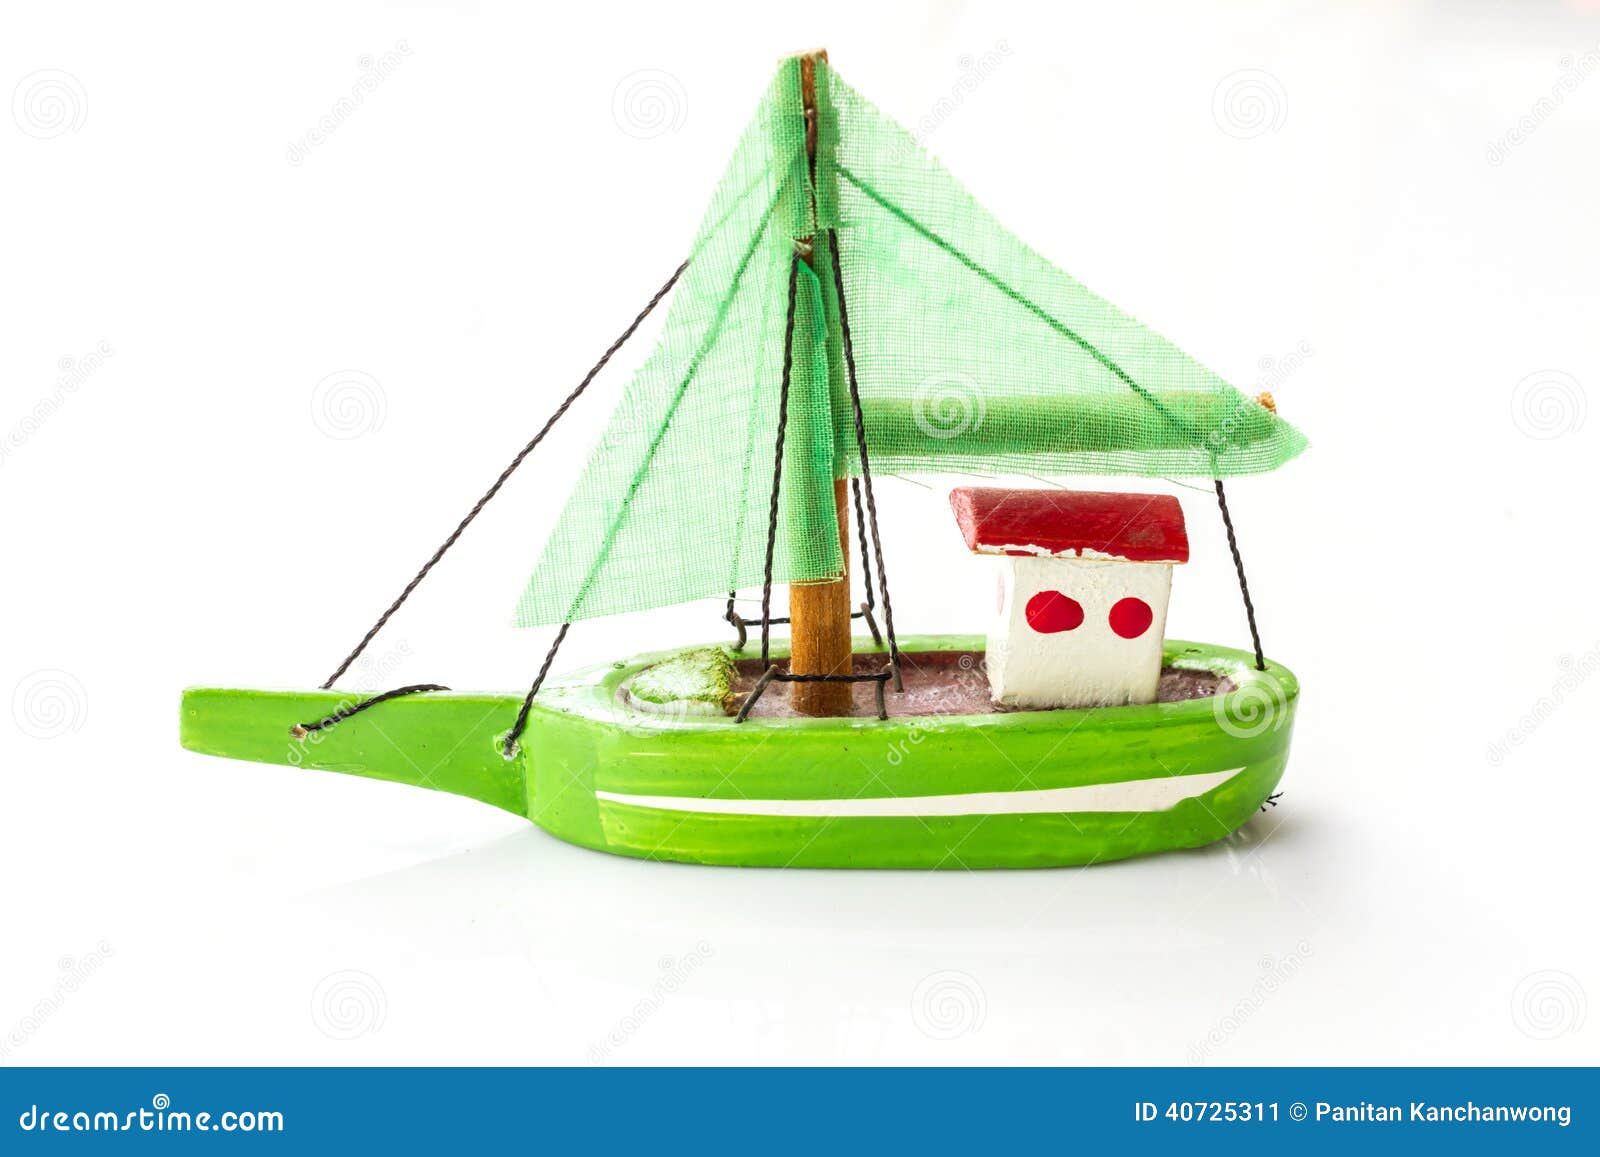 Green Wooden Fishing Boat Toy Stock Photos - Free & Royalty-Free